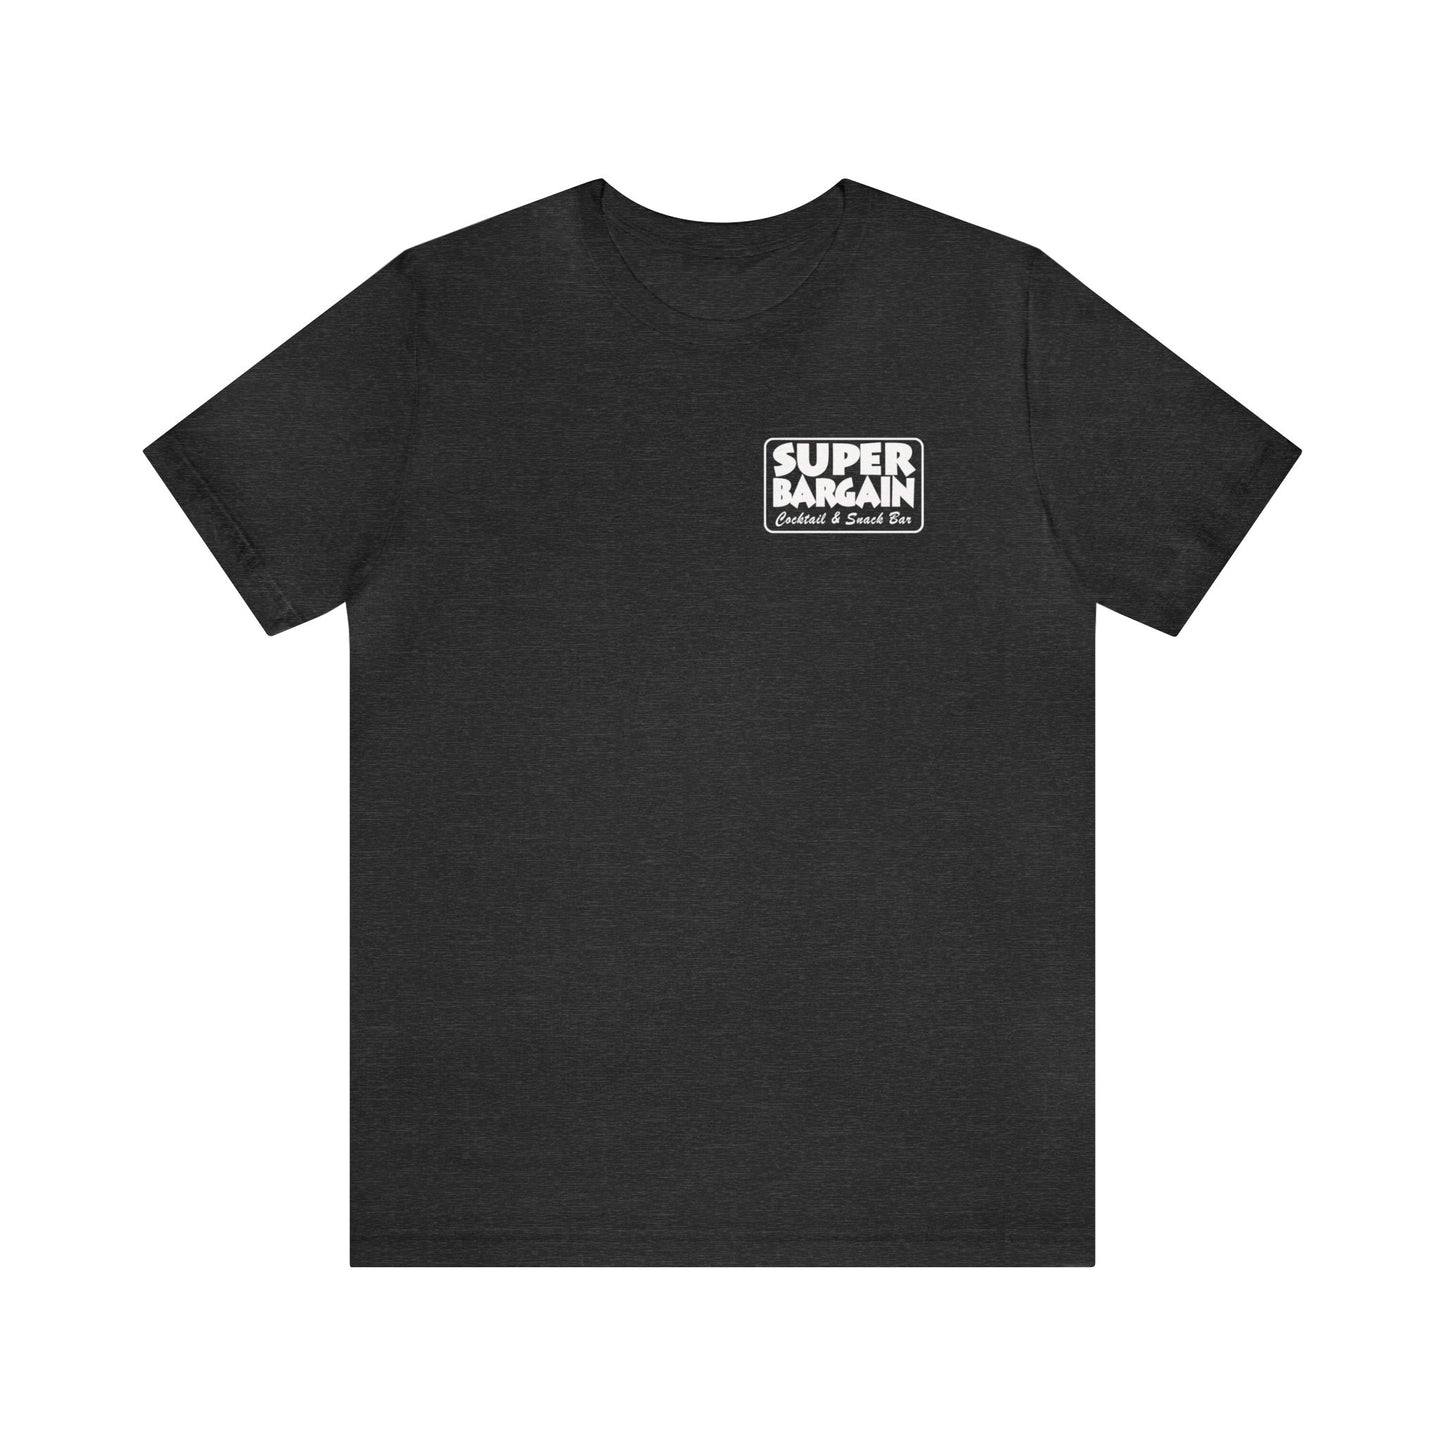 A plain dark gray Unisex Jersey Short Sleeve Monochrome Logo Tee with a small logo on the left chest area that reads "Super Sugar" in a game-themed font on a white background, designed in Cabbagetown, Toronto by Printify.